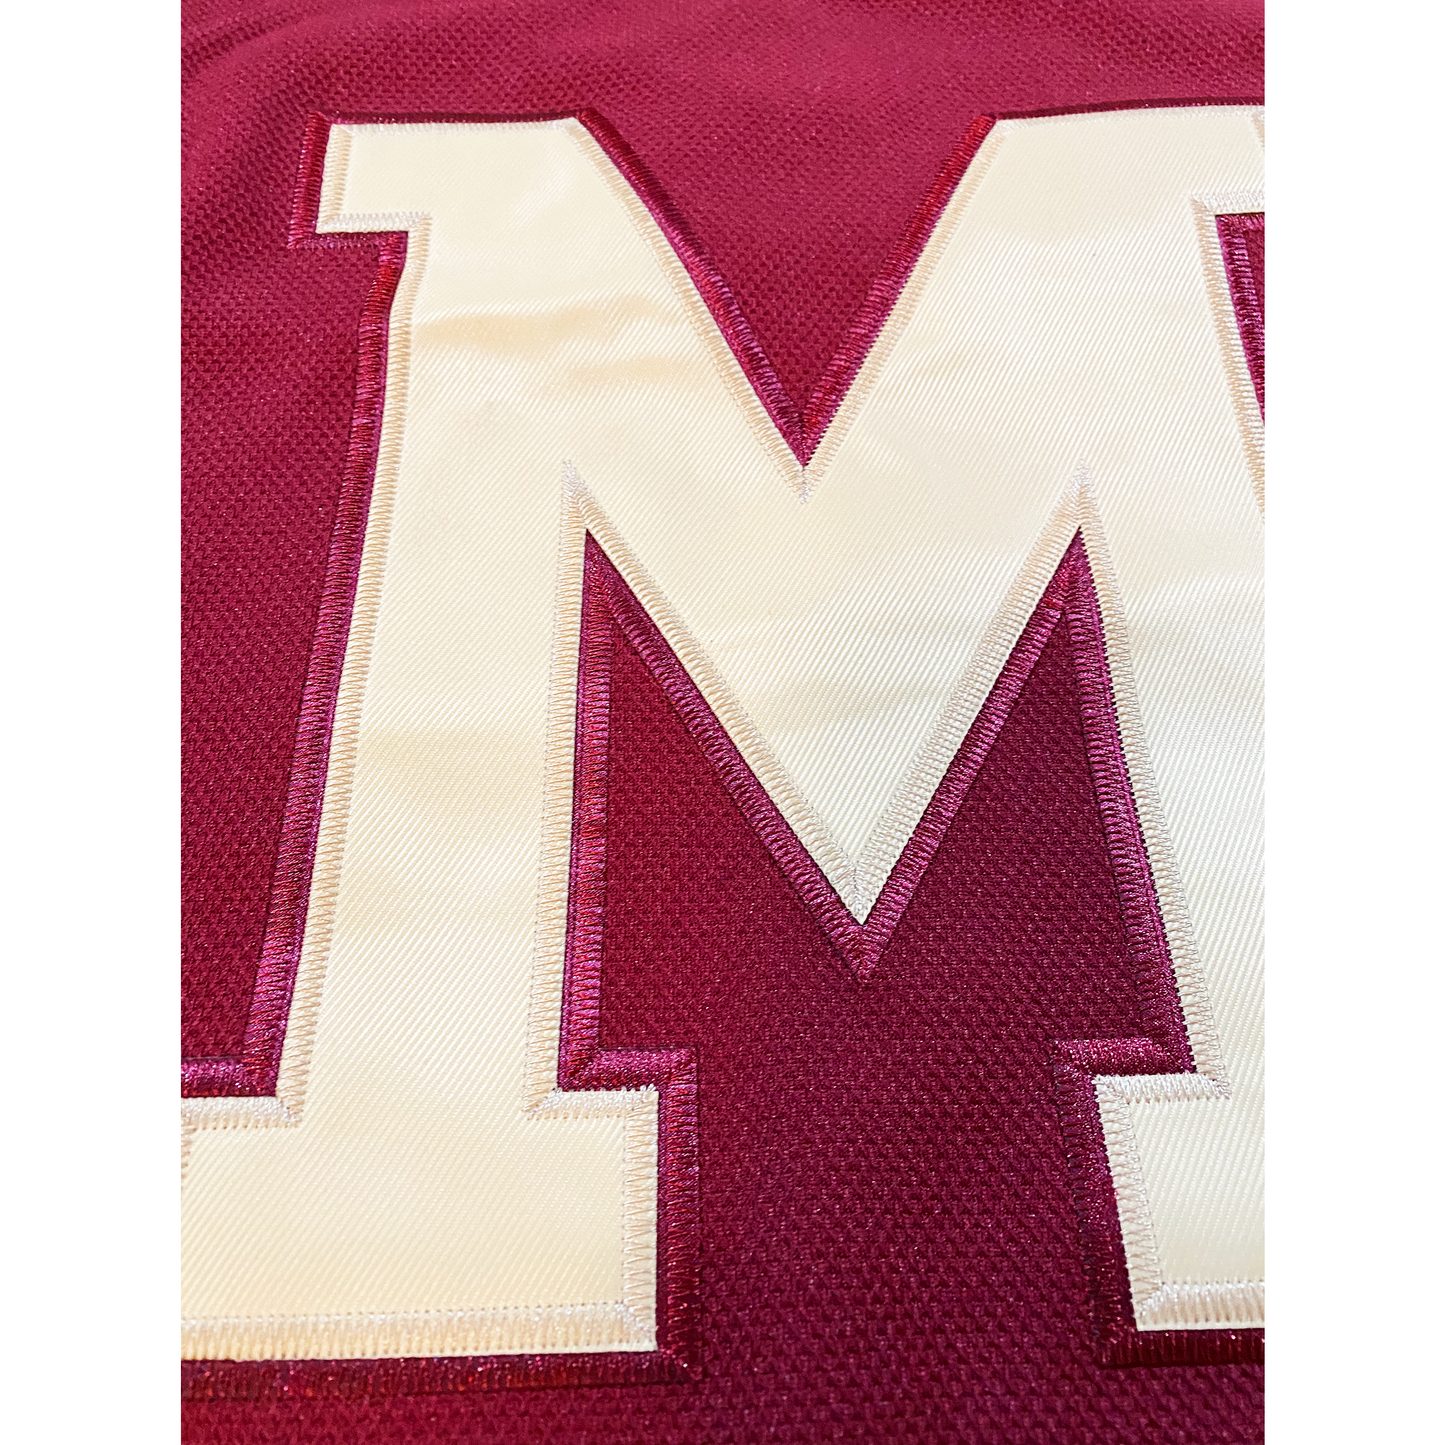 Montreal Maroons Jersey